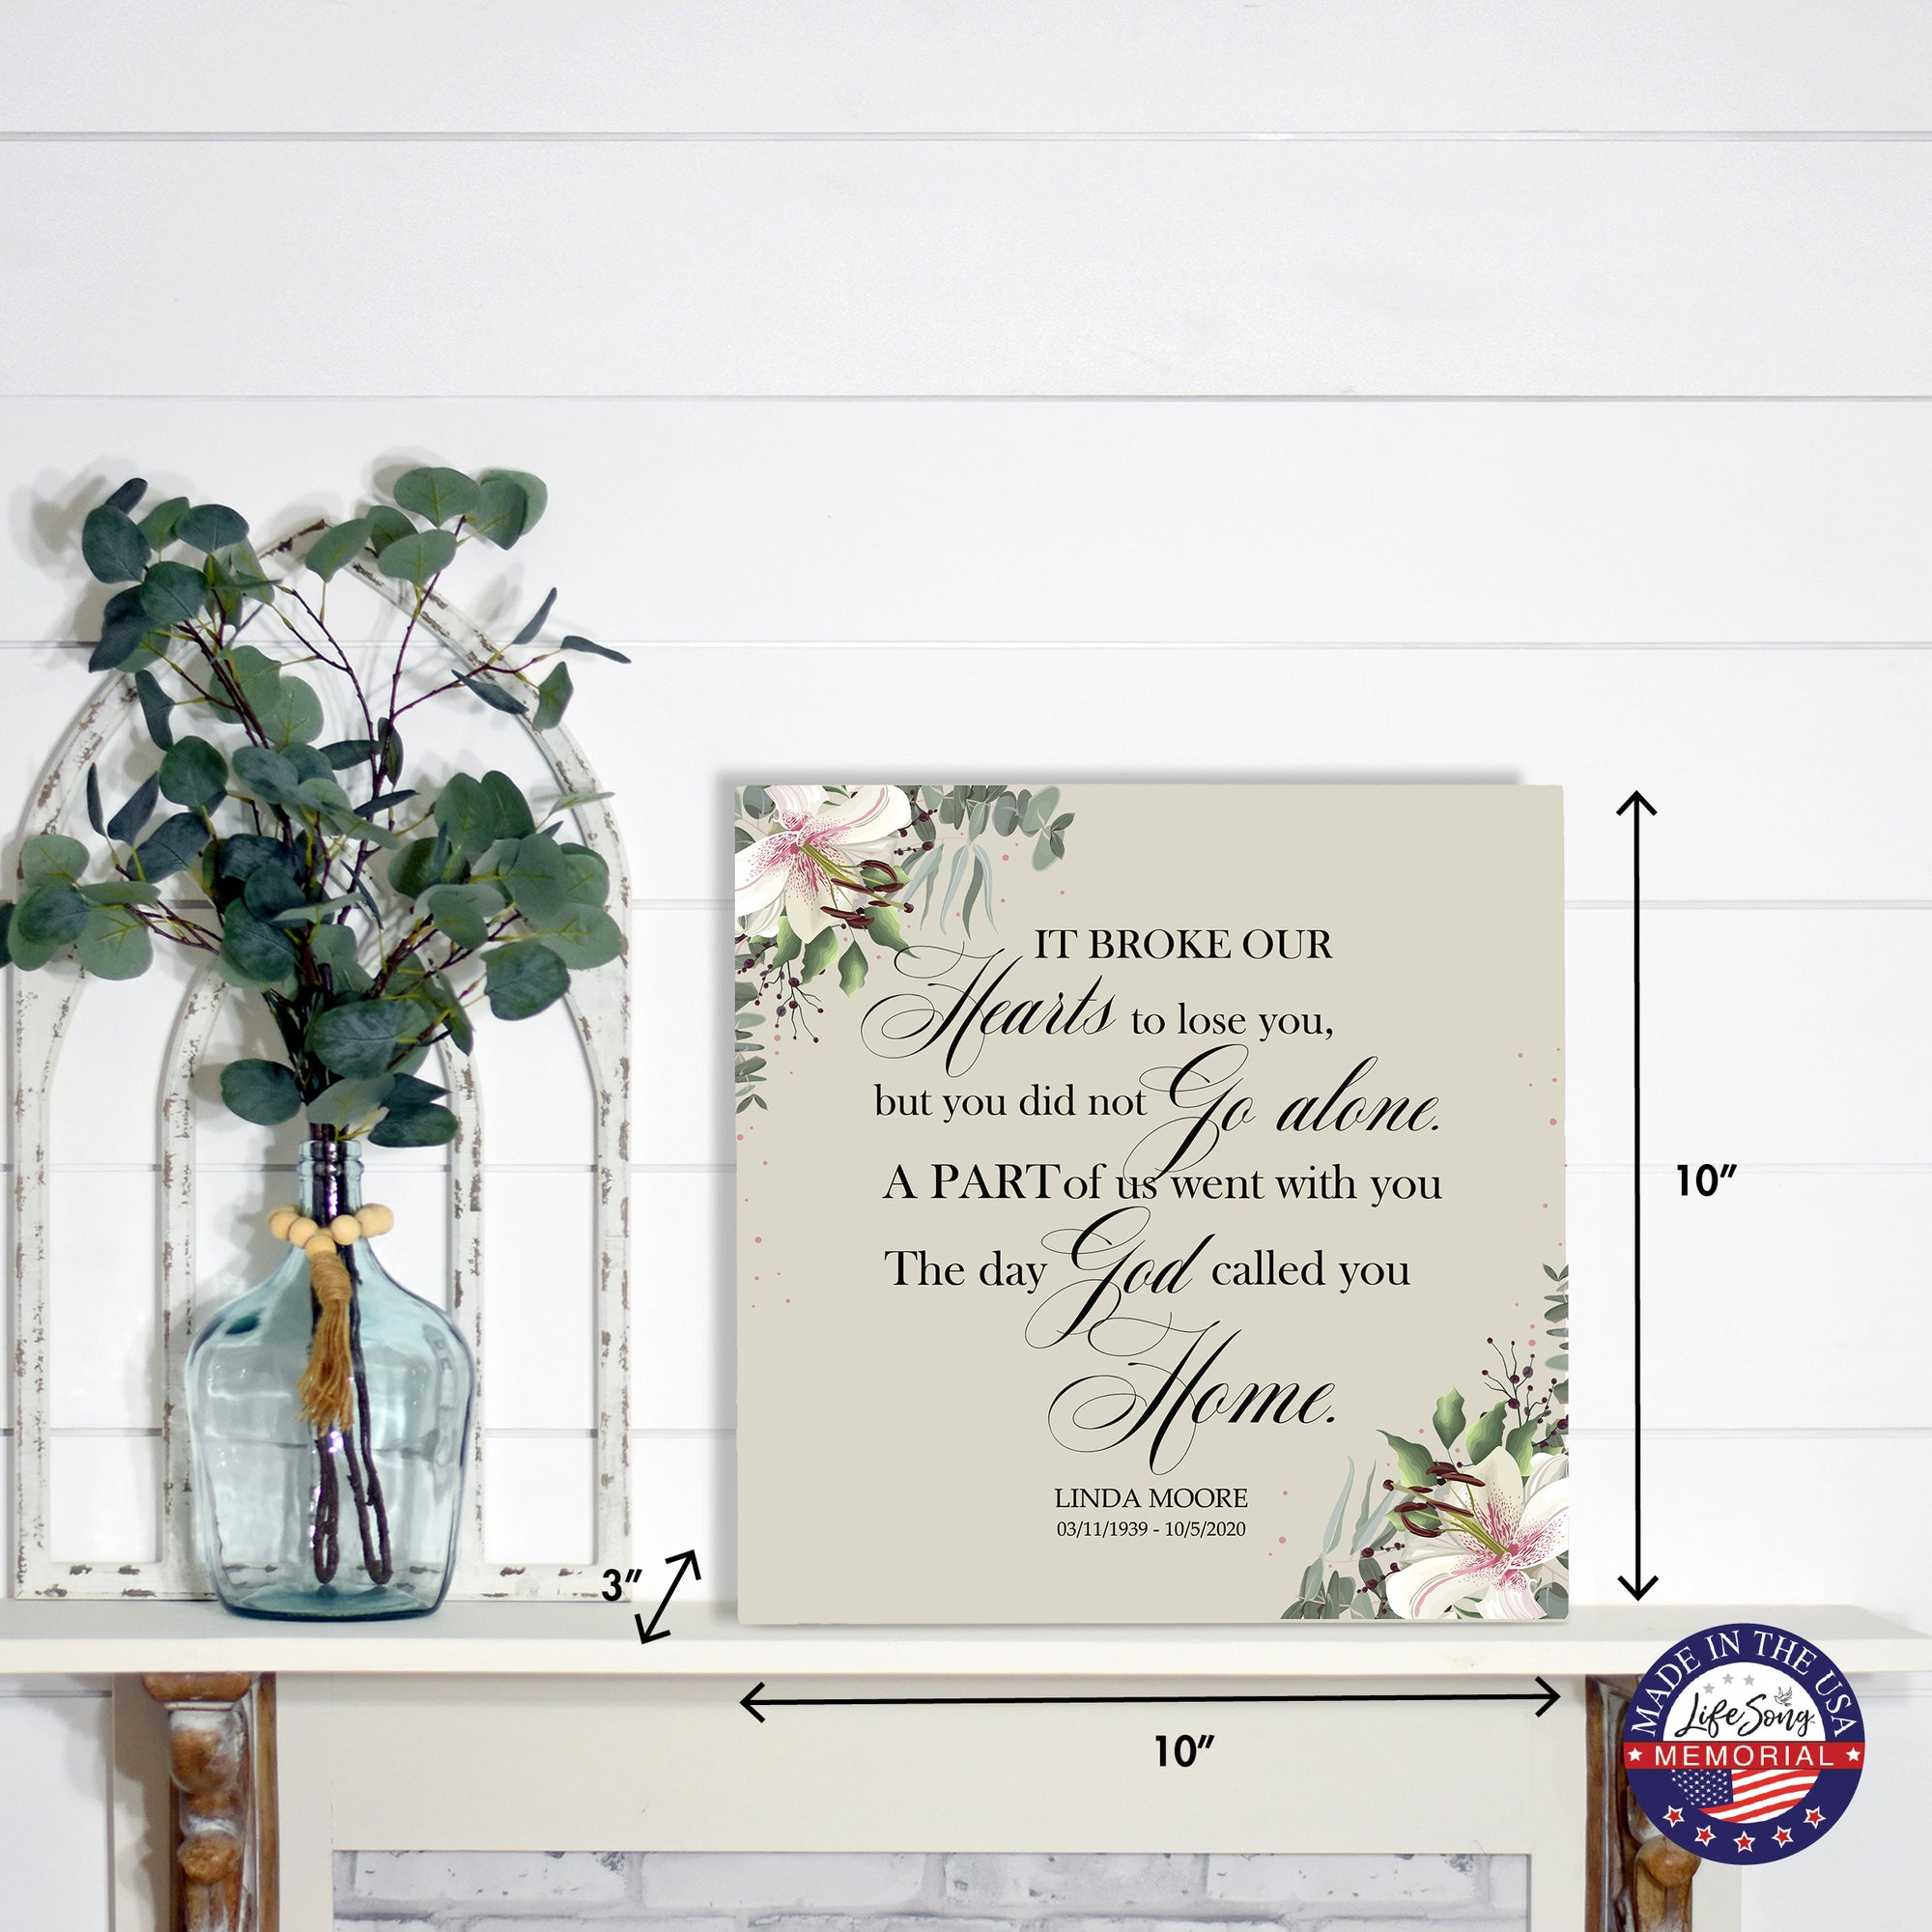 Timeless Human Memorial Shadow Box Urn With Inspirational Verse in Ivory - It Broke Our Hearts